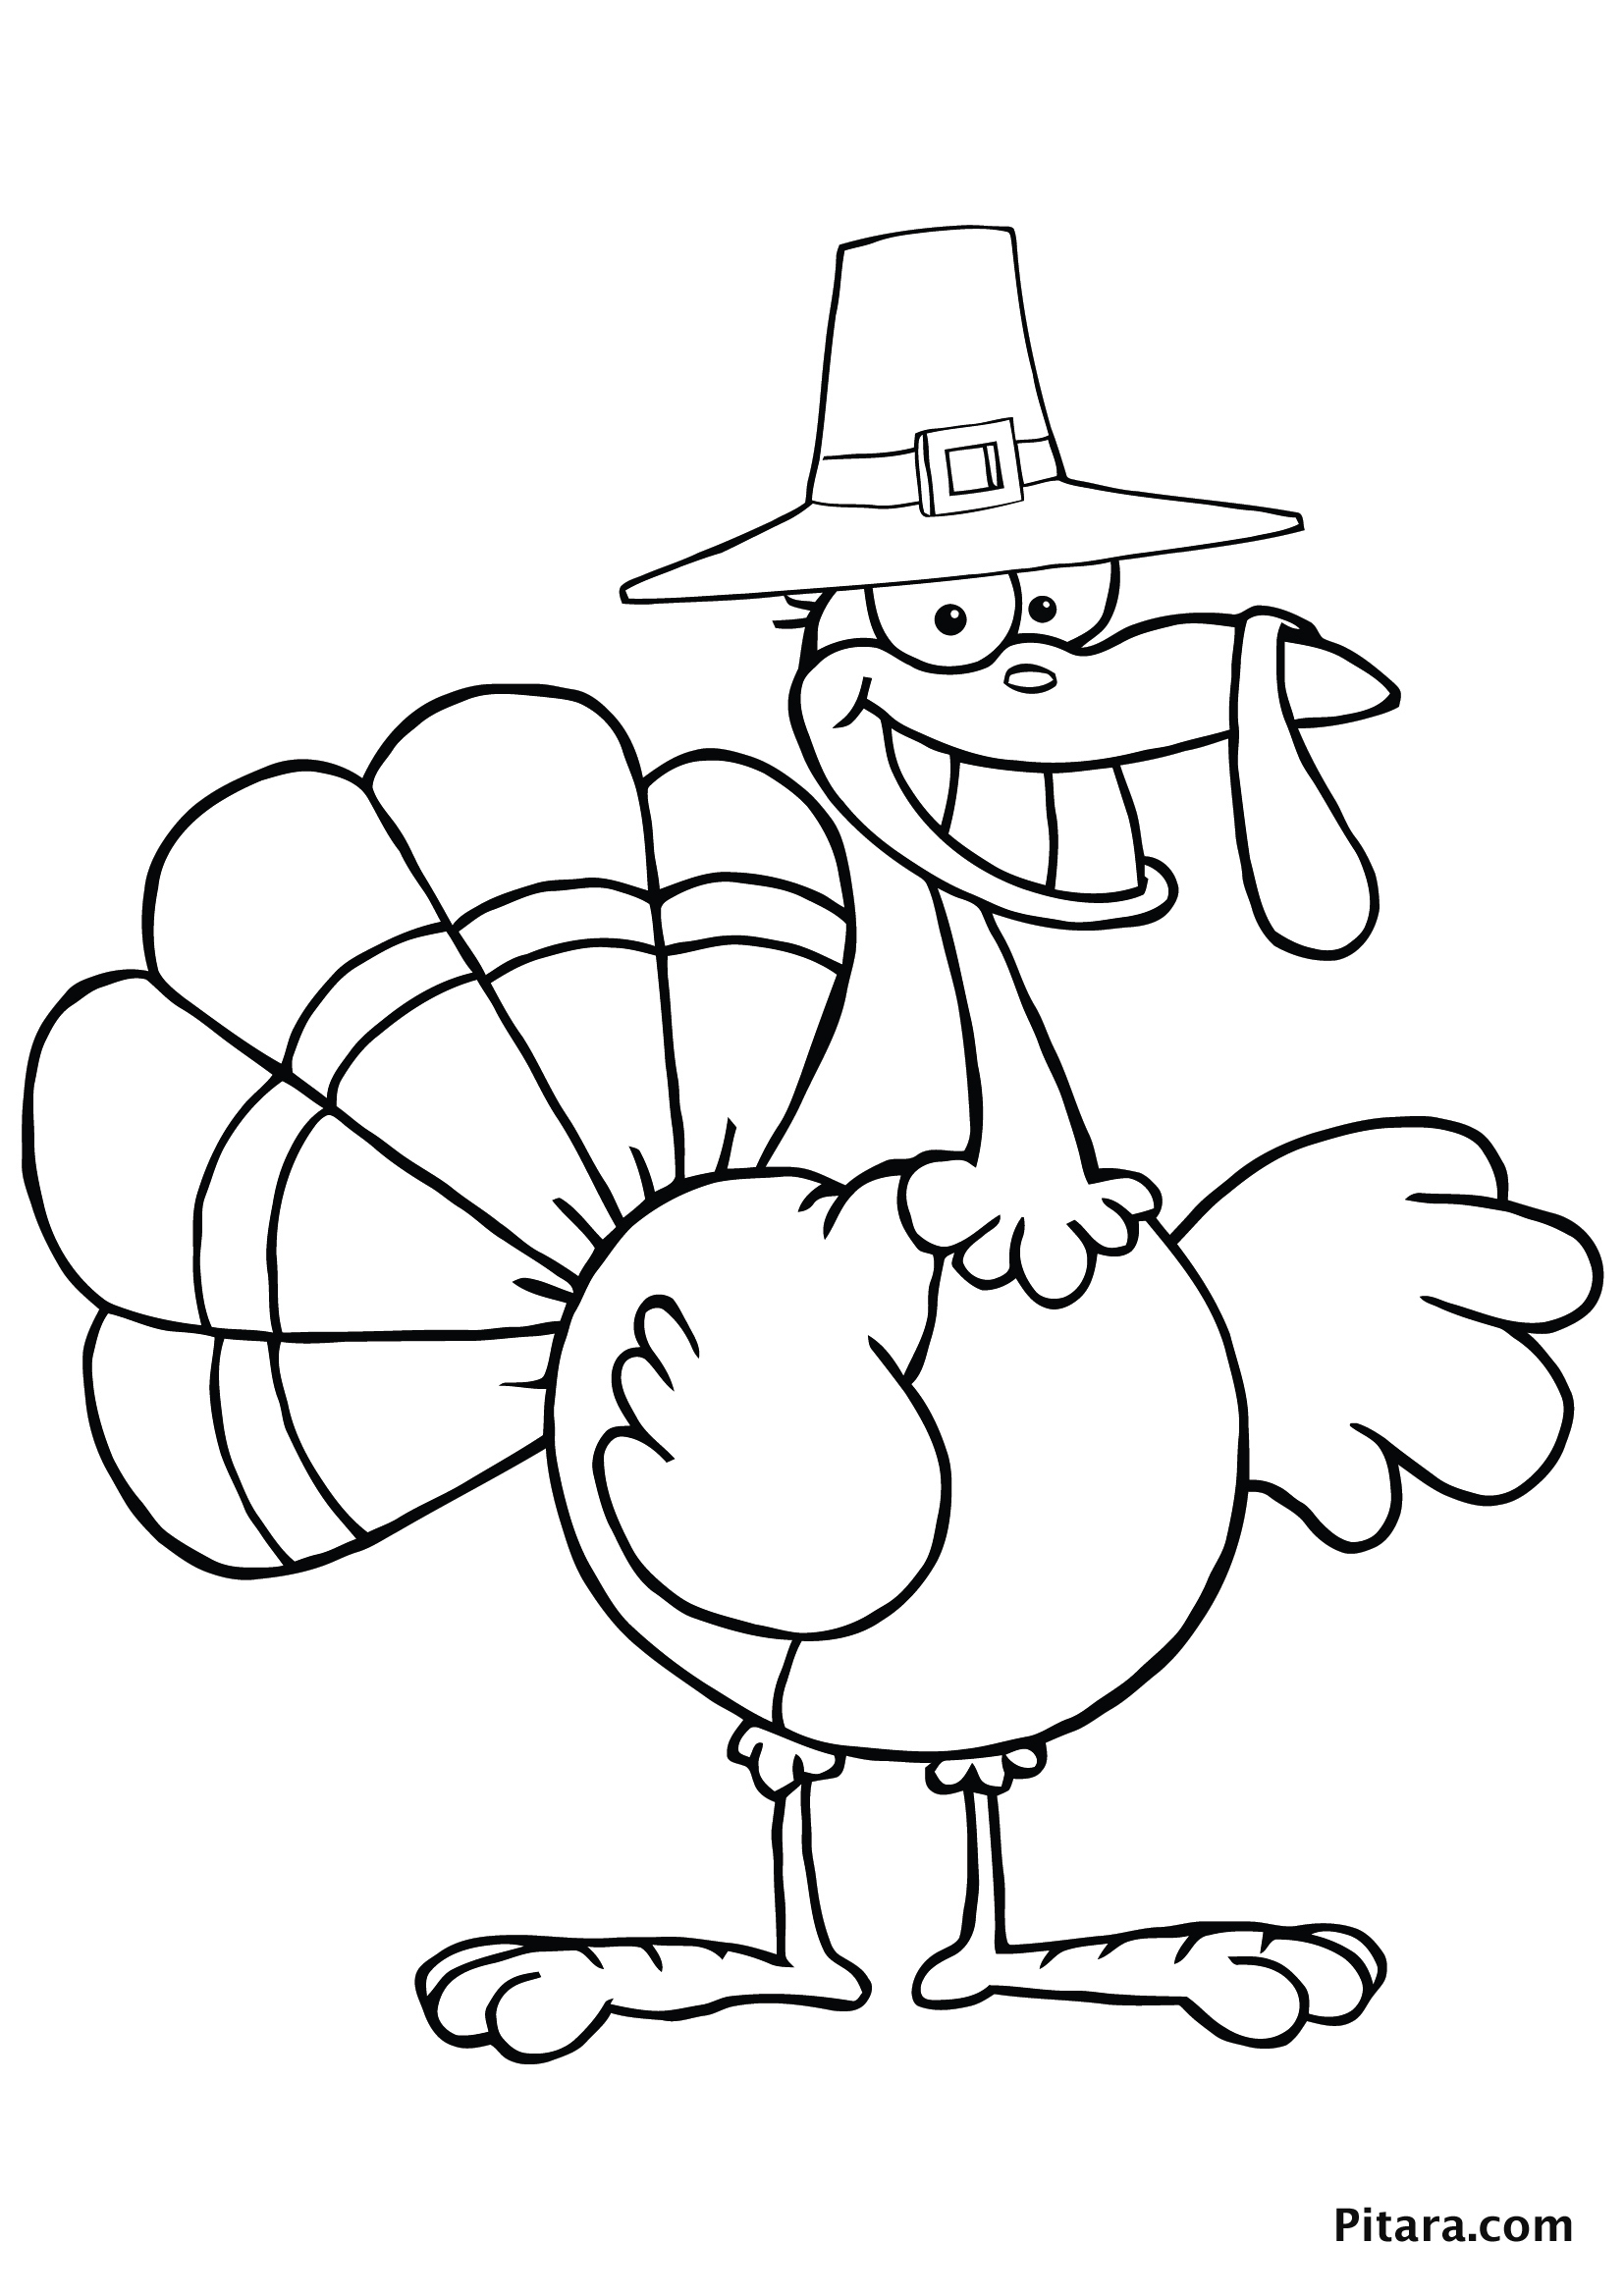 Turkey Coloring Pages for Kids   Pitara Kids Network